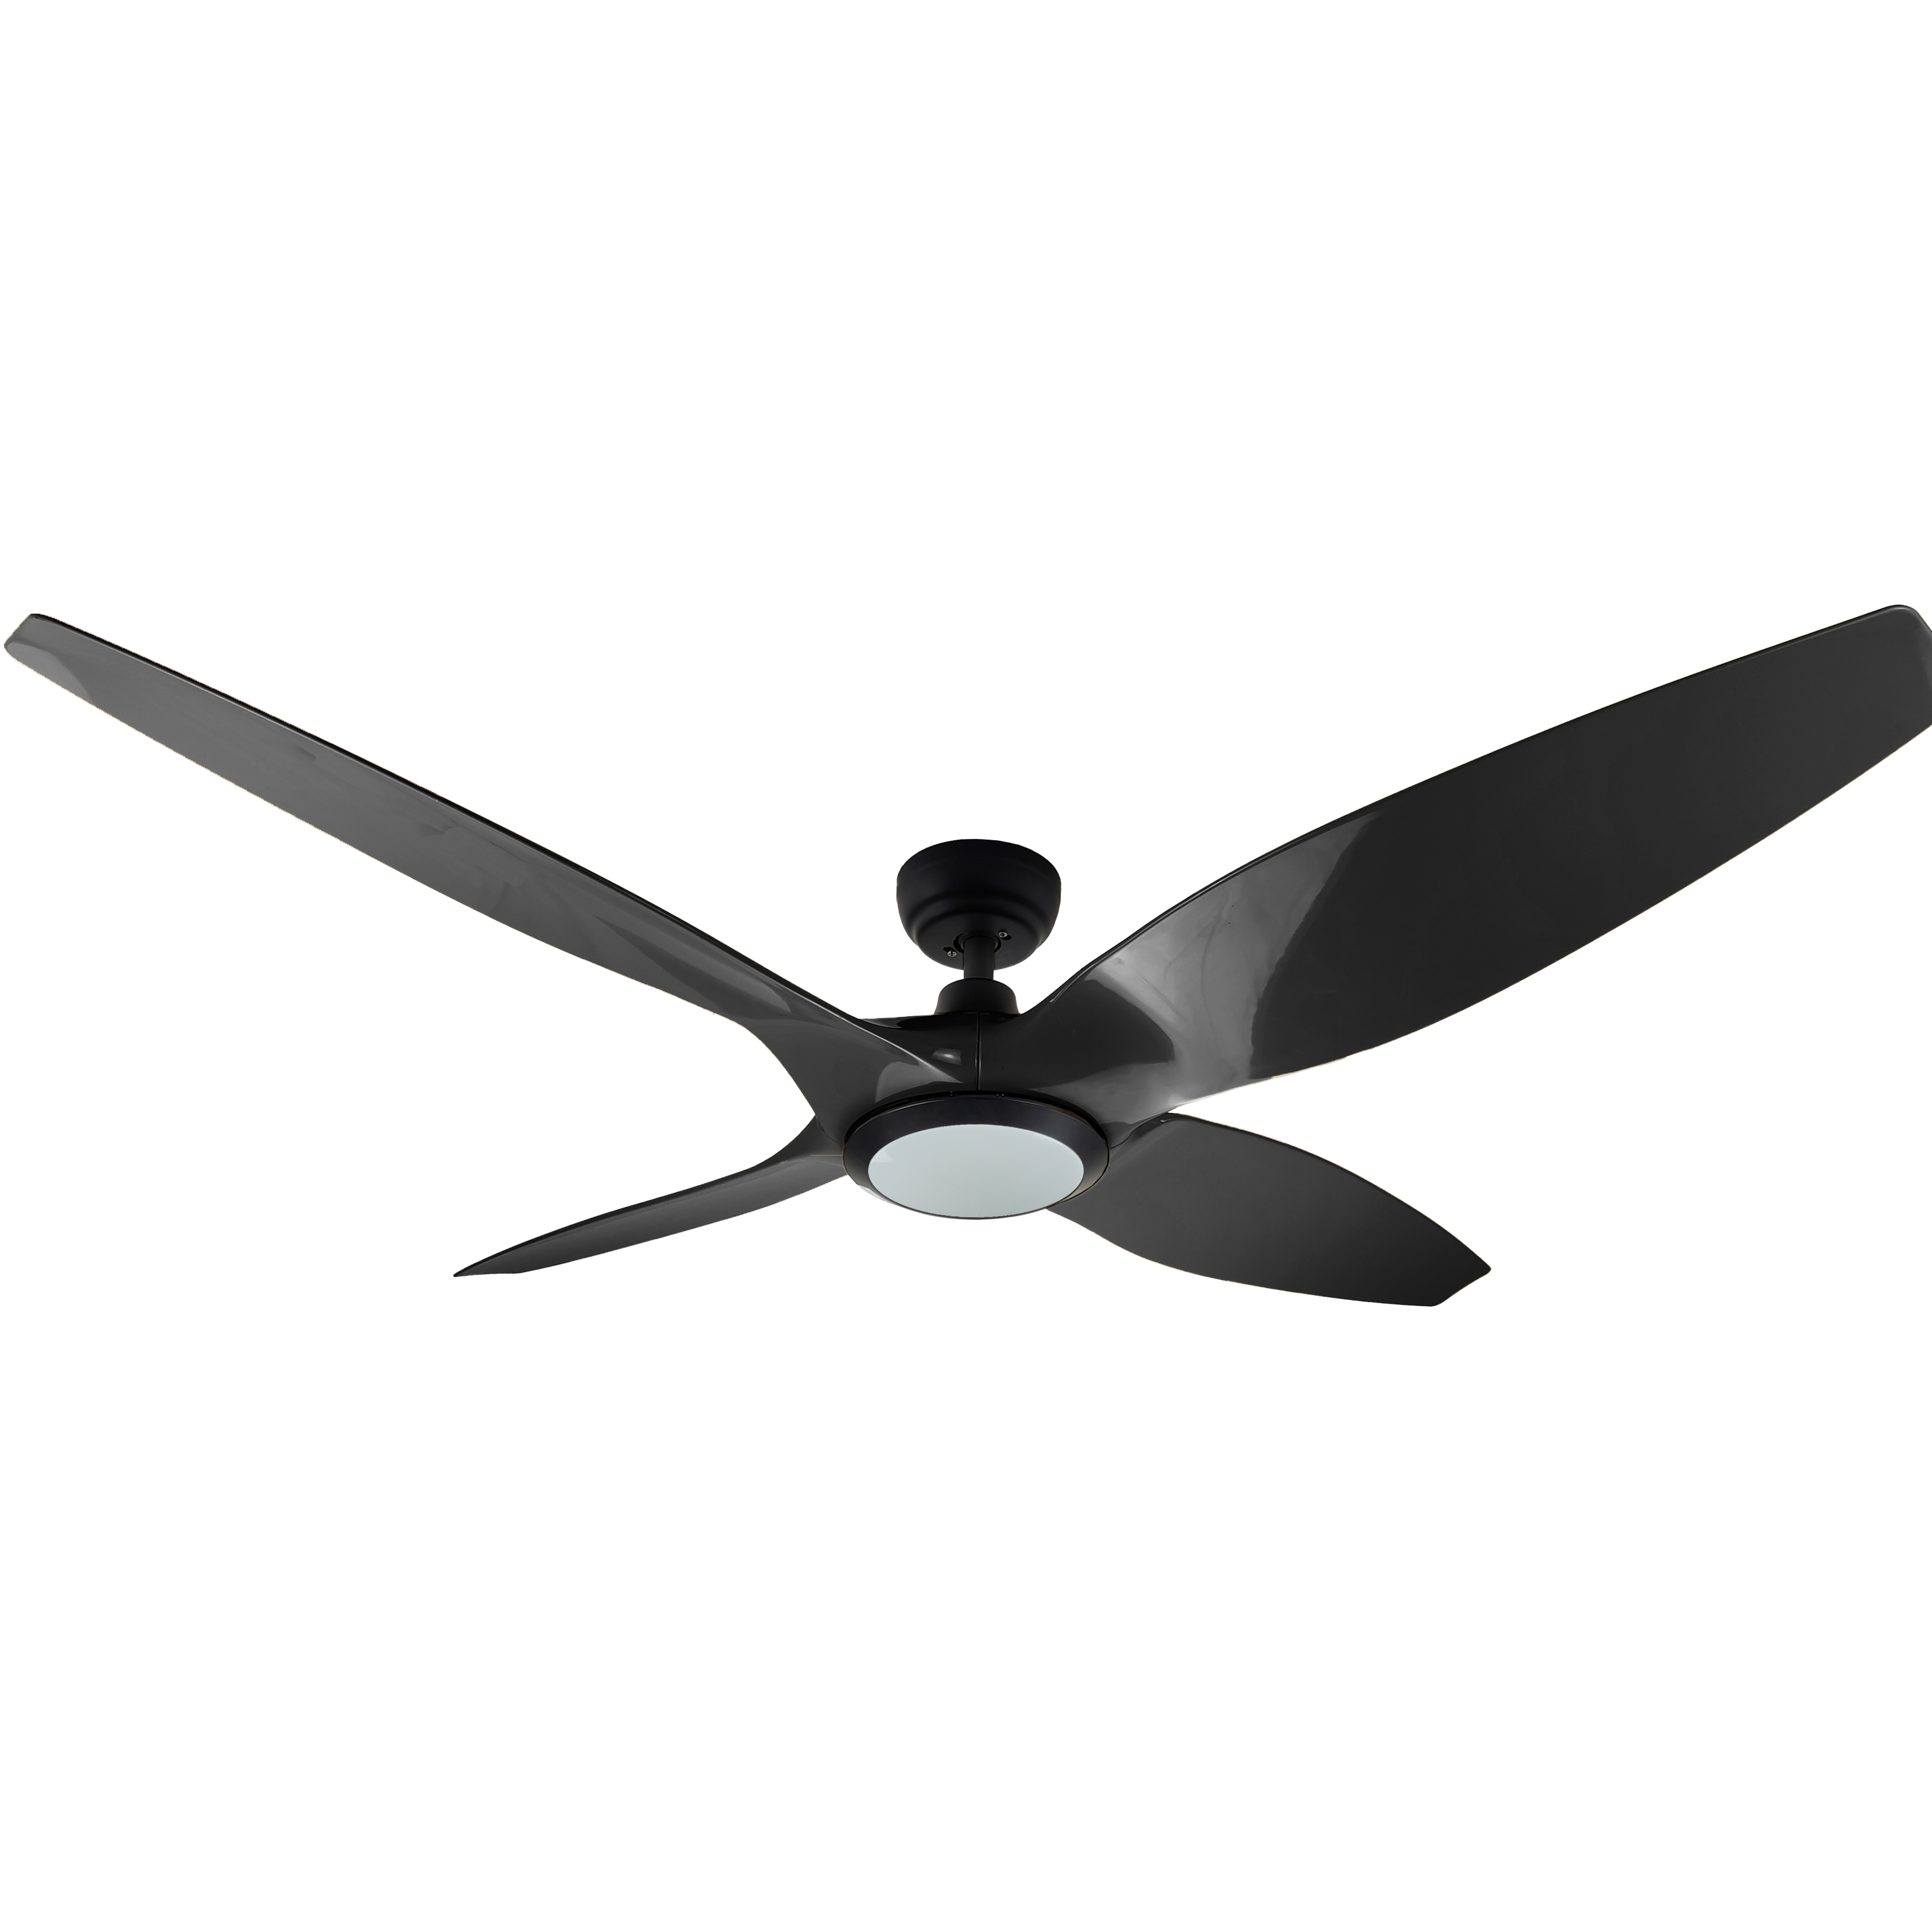 AirBena 60 Inch Modern Series DC Motor Ceiling Fans Home Appliances Electric Domestic Ceiling Fan with LED Light